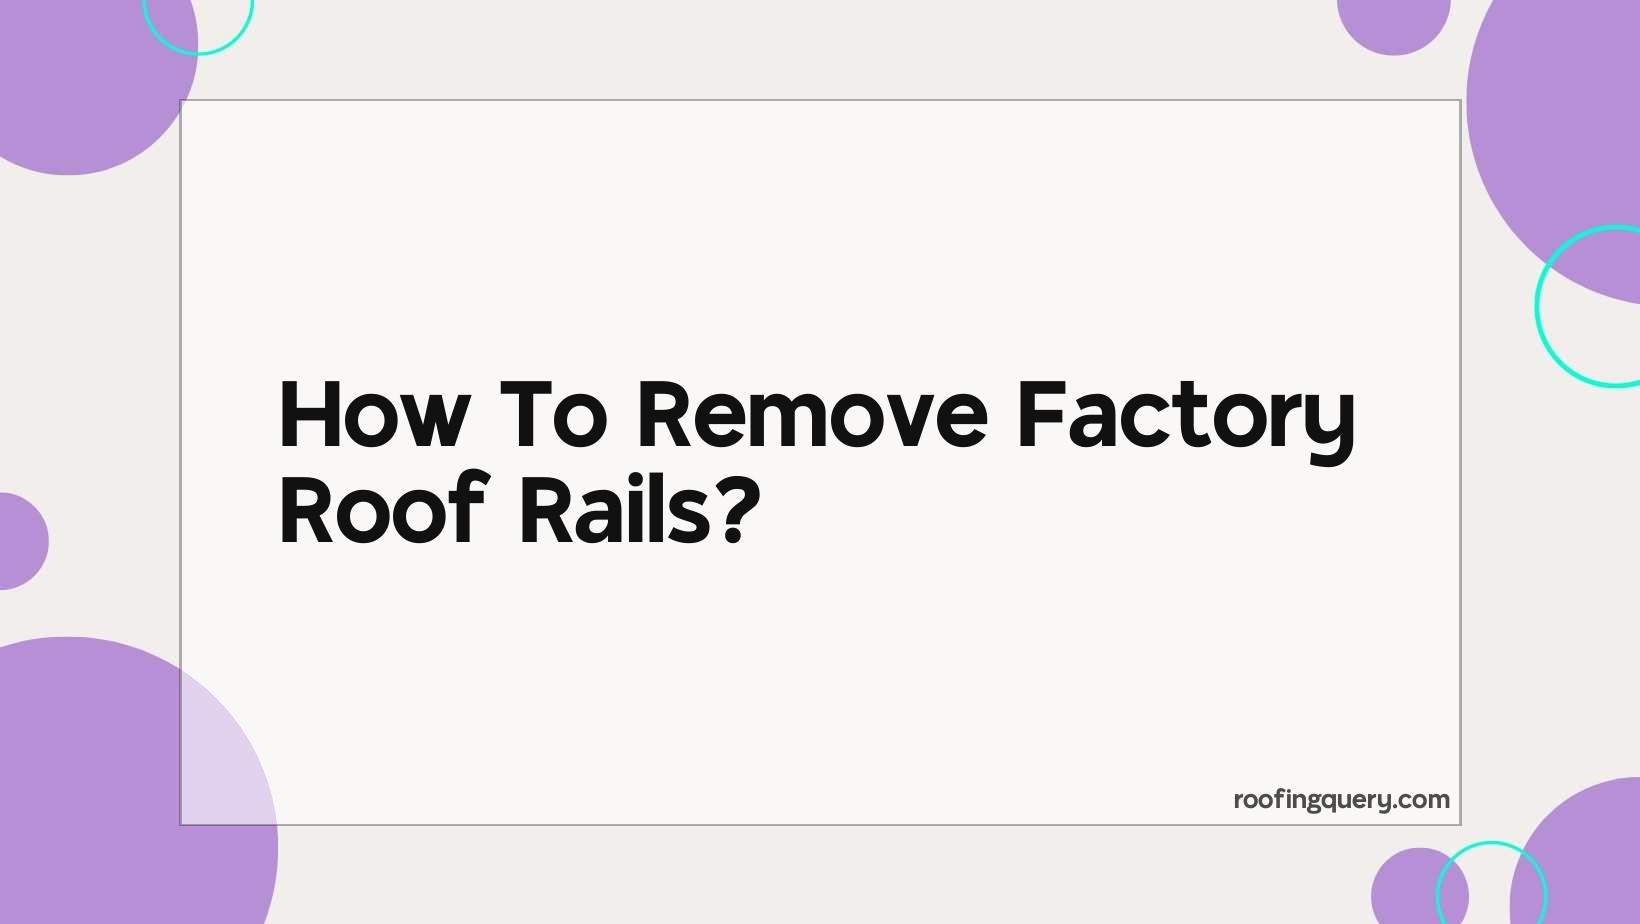 How To Remove Factory Roof Rails?